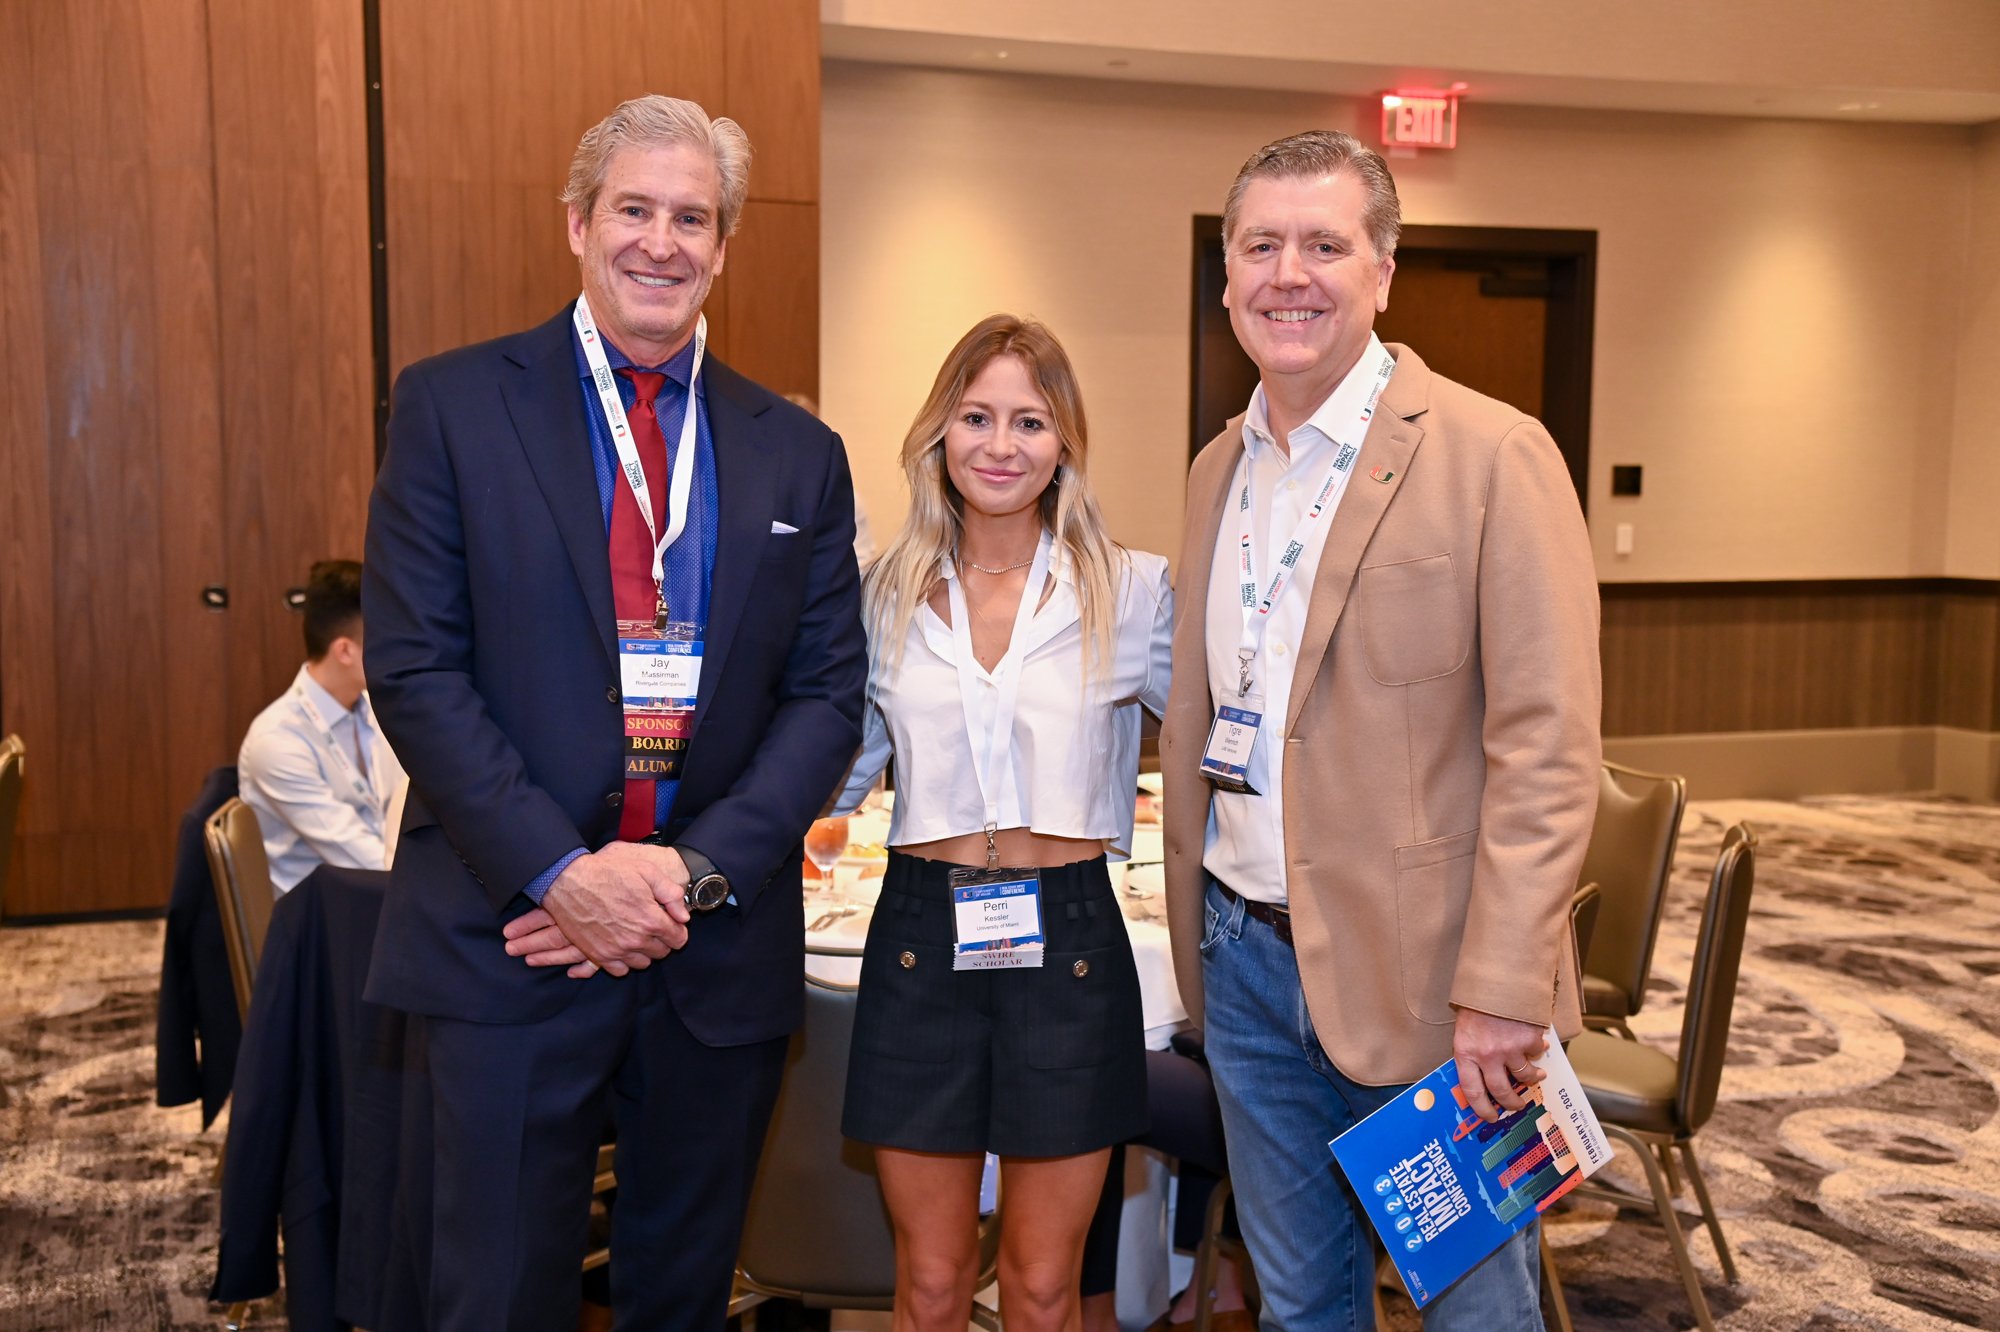 University of Miami Real Estate Impact Conference 2023 The Largest Edition Yet As Real Estate Leaders Discuss The State of Miami Real Estate 159.jpg